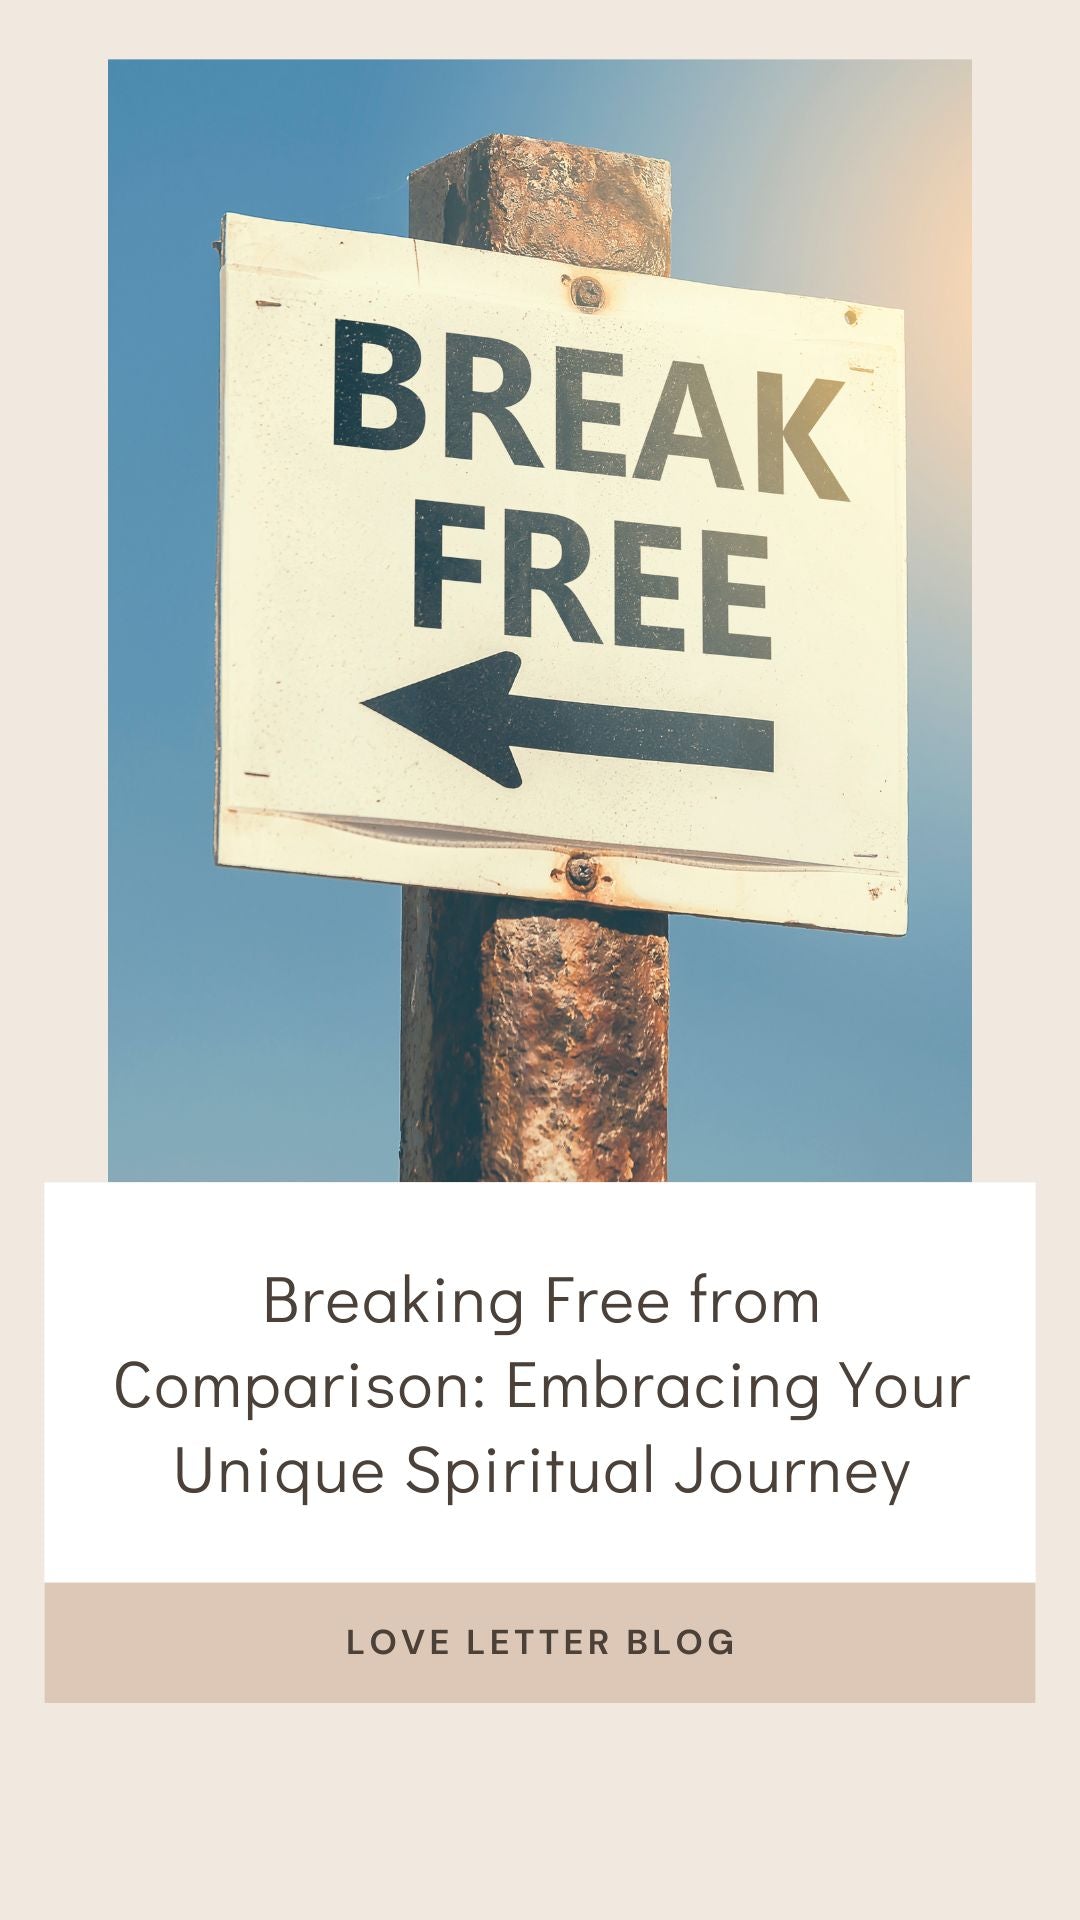 Breaking Free from Comparison: Embracing Your Unique Spiritual Journey